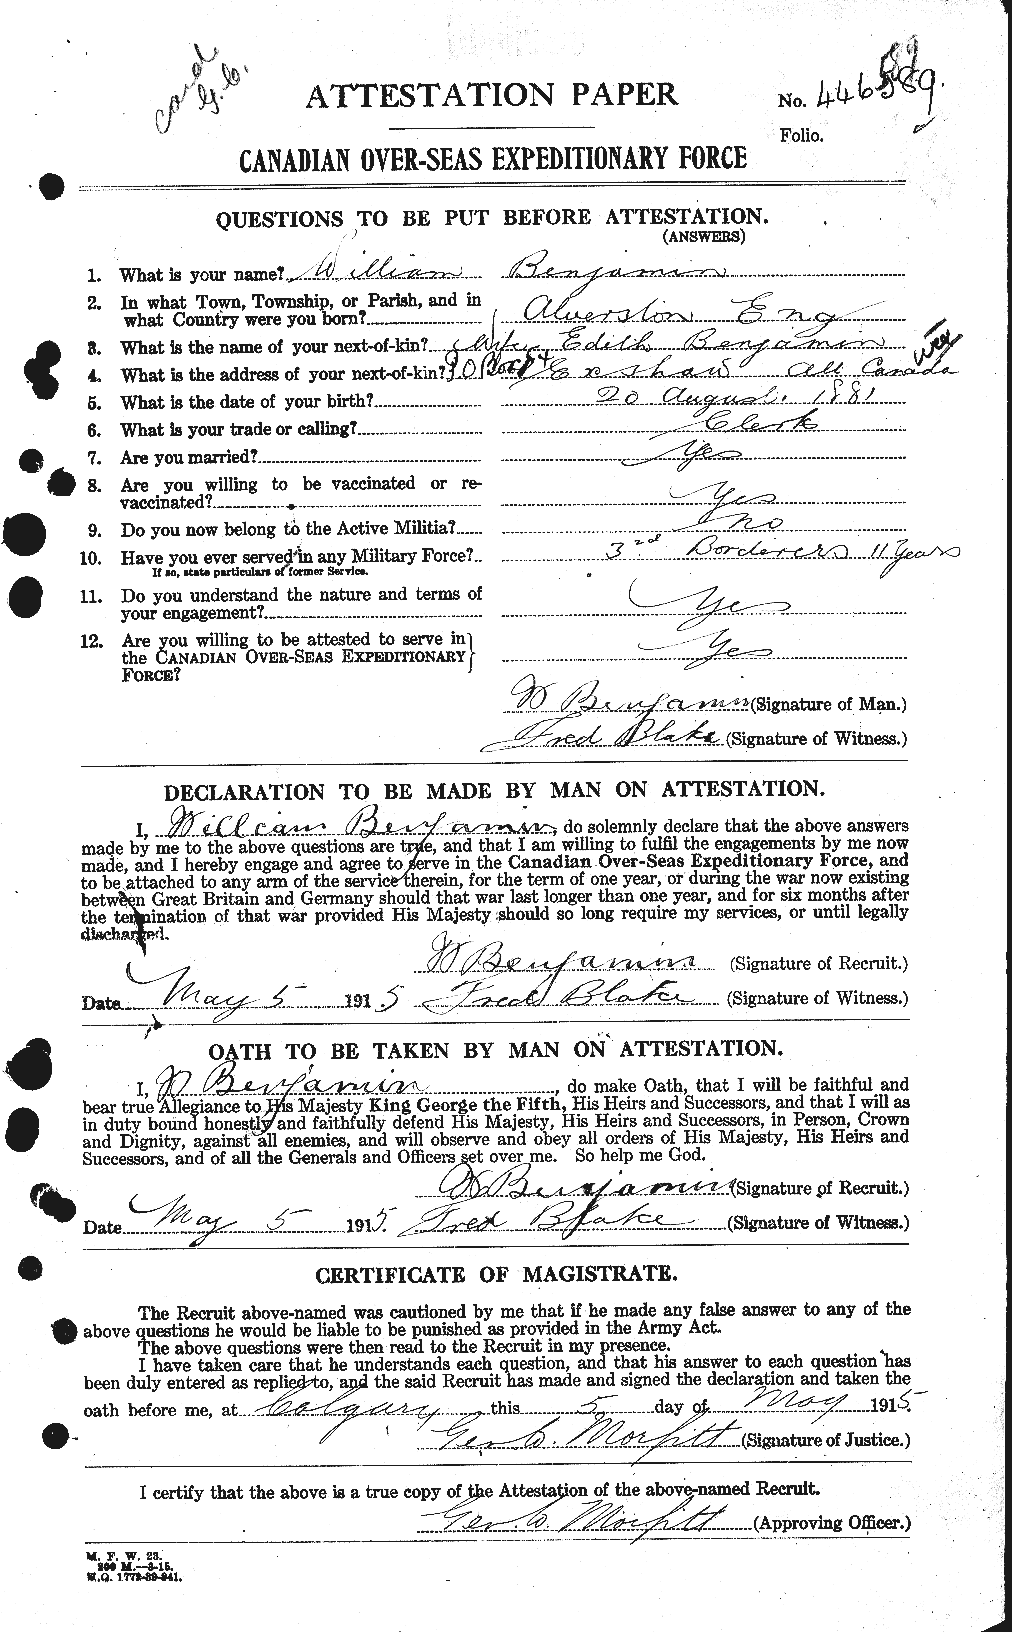 Personnel Records of the First World War - CEF 233181a